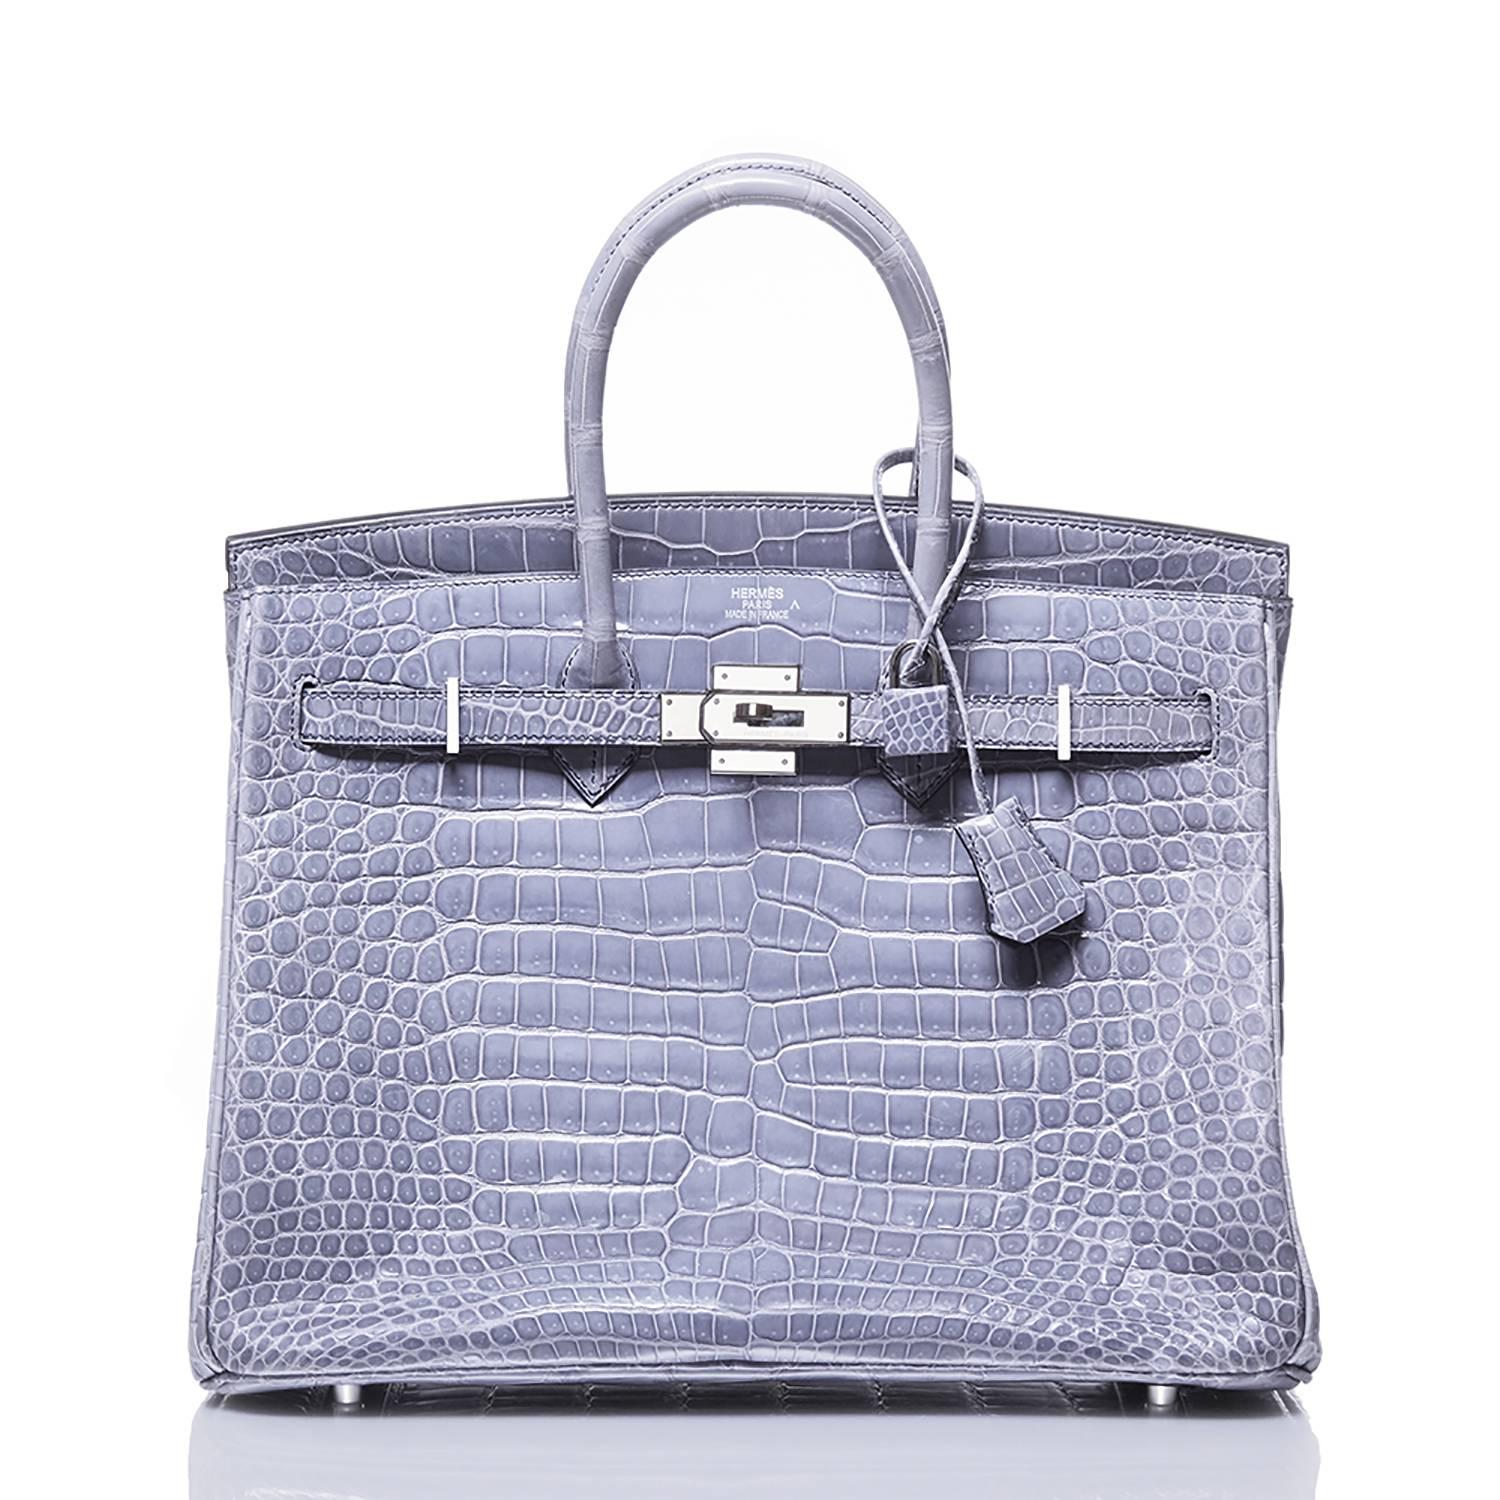 This exotic addition to the elevated range of Birkin bags from Hermès includes the classic 35cm size crafted in a soft, light blue crocodile leather, complimented by silver-tone hardware. This piece features a medium internal pocket along with